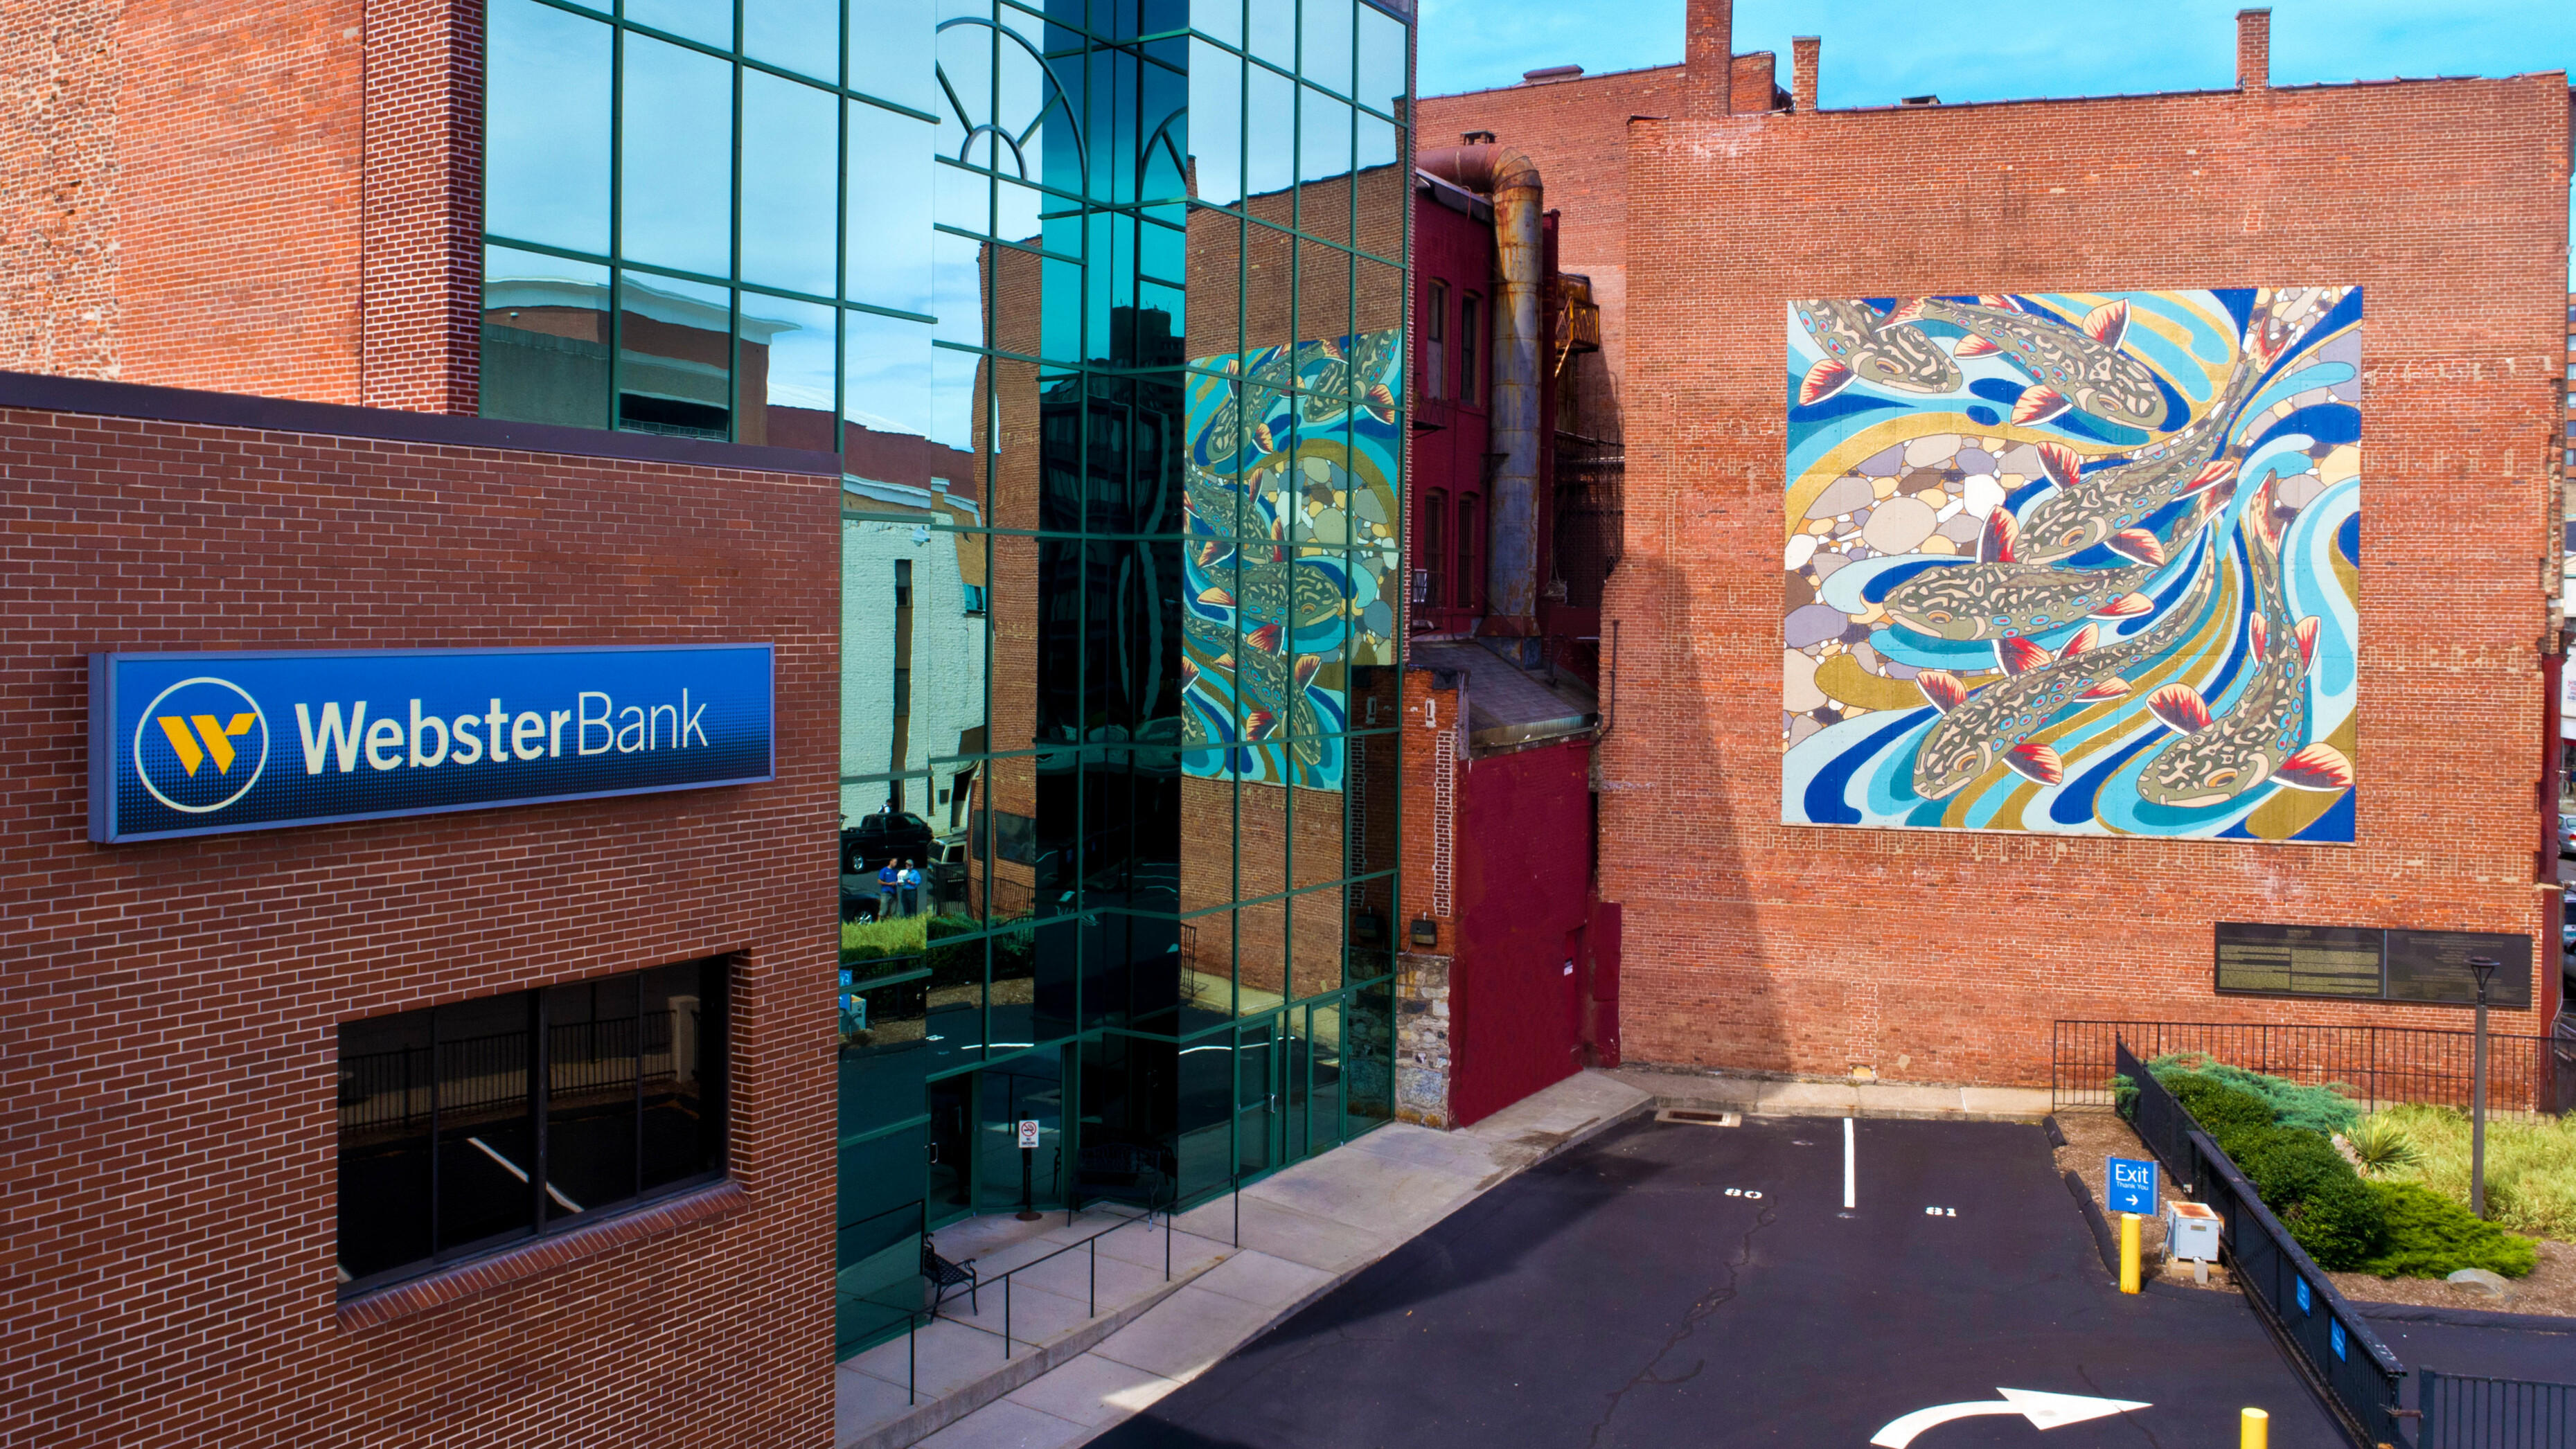 A public art mural on the side of a building in dowtown Waterbury, Connecticut.